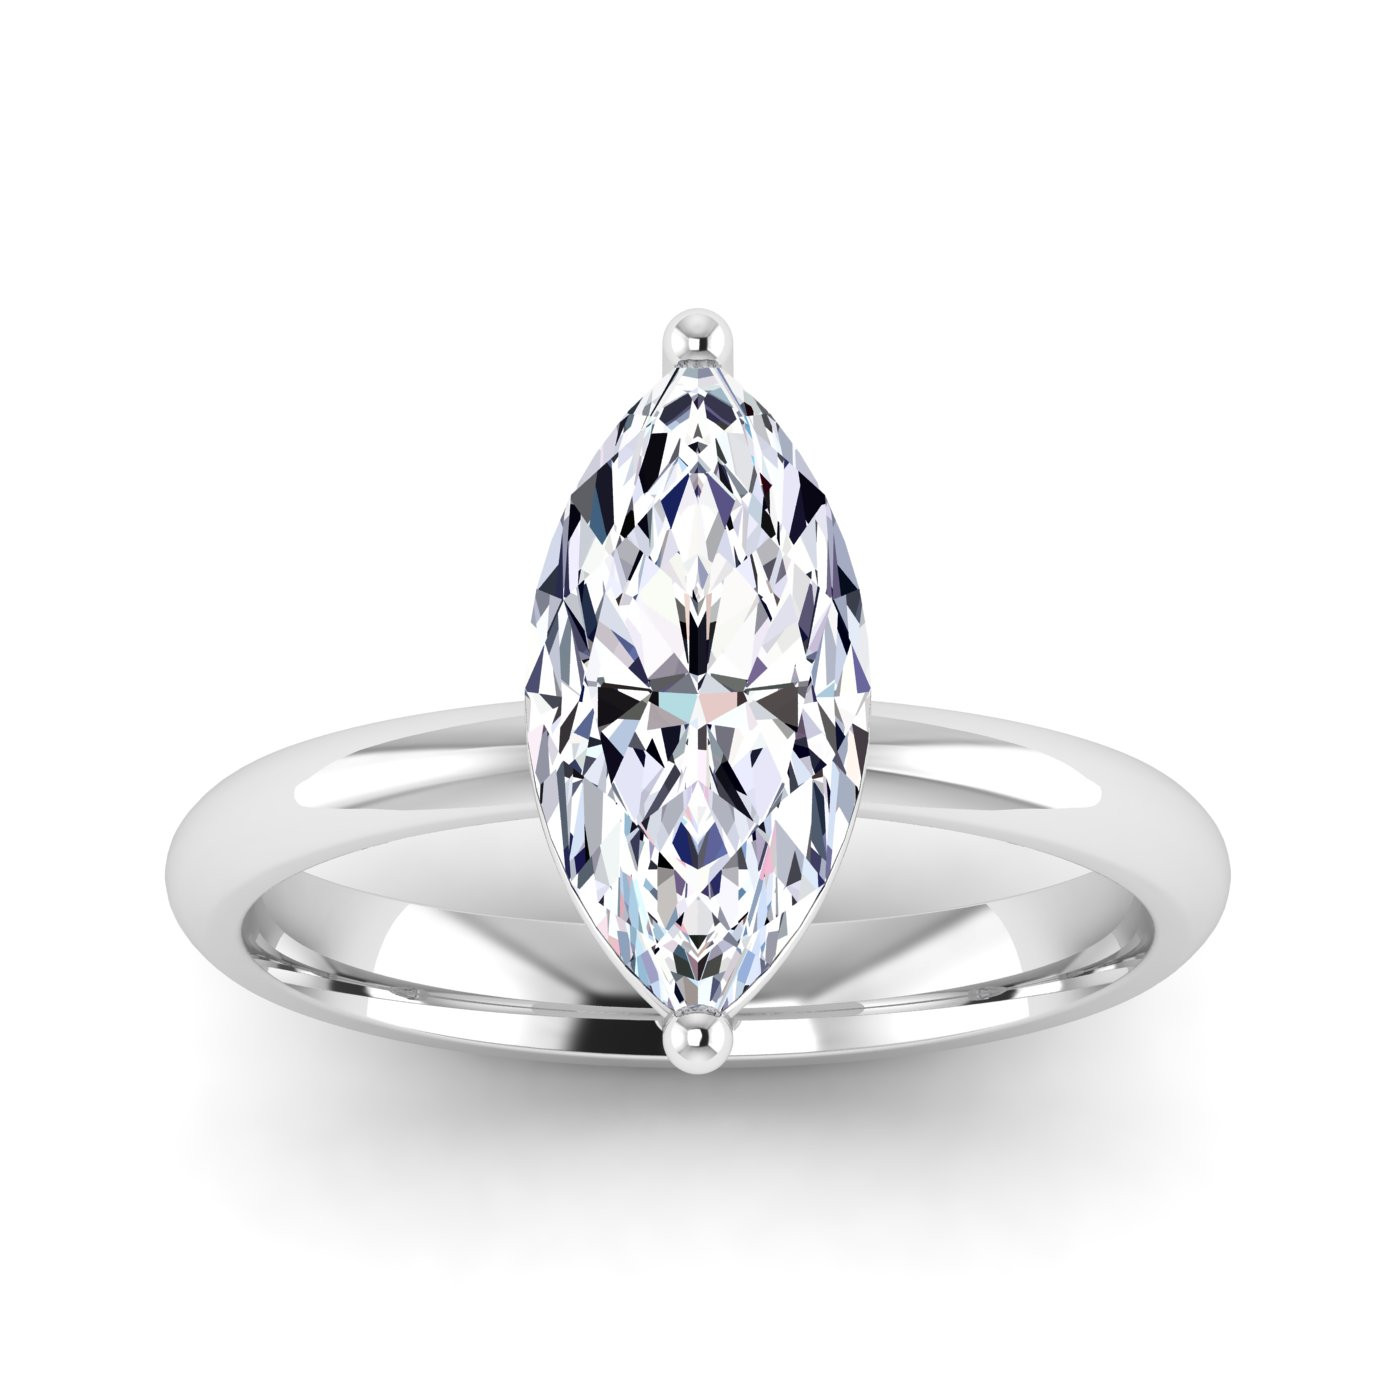 2CT LAB MQ SOLITAIRE RING